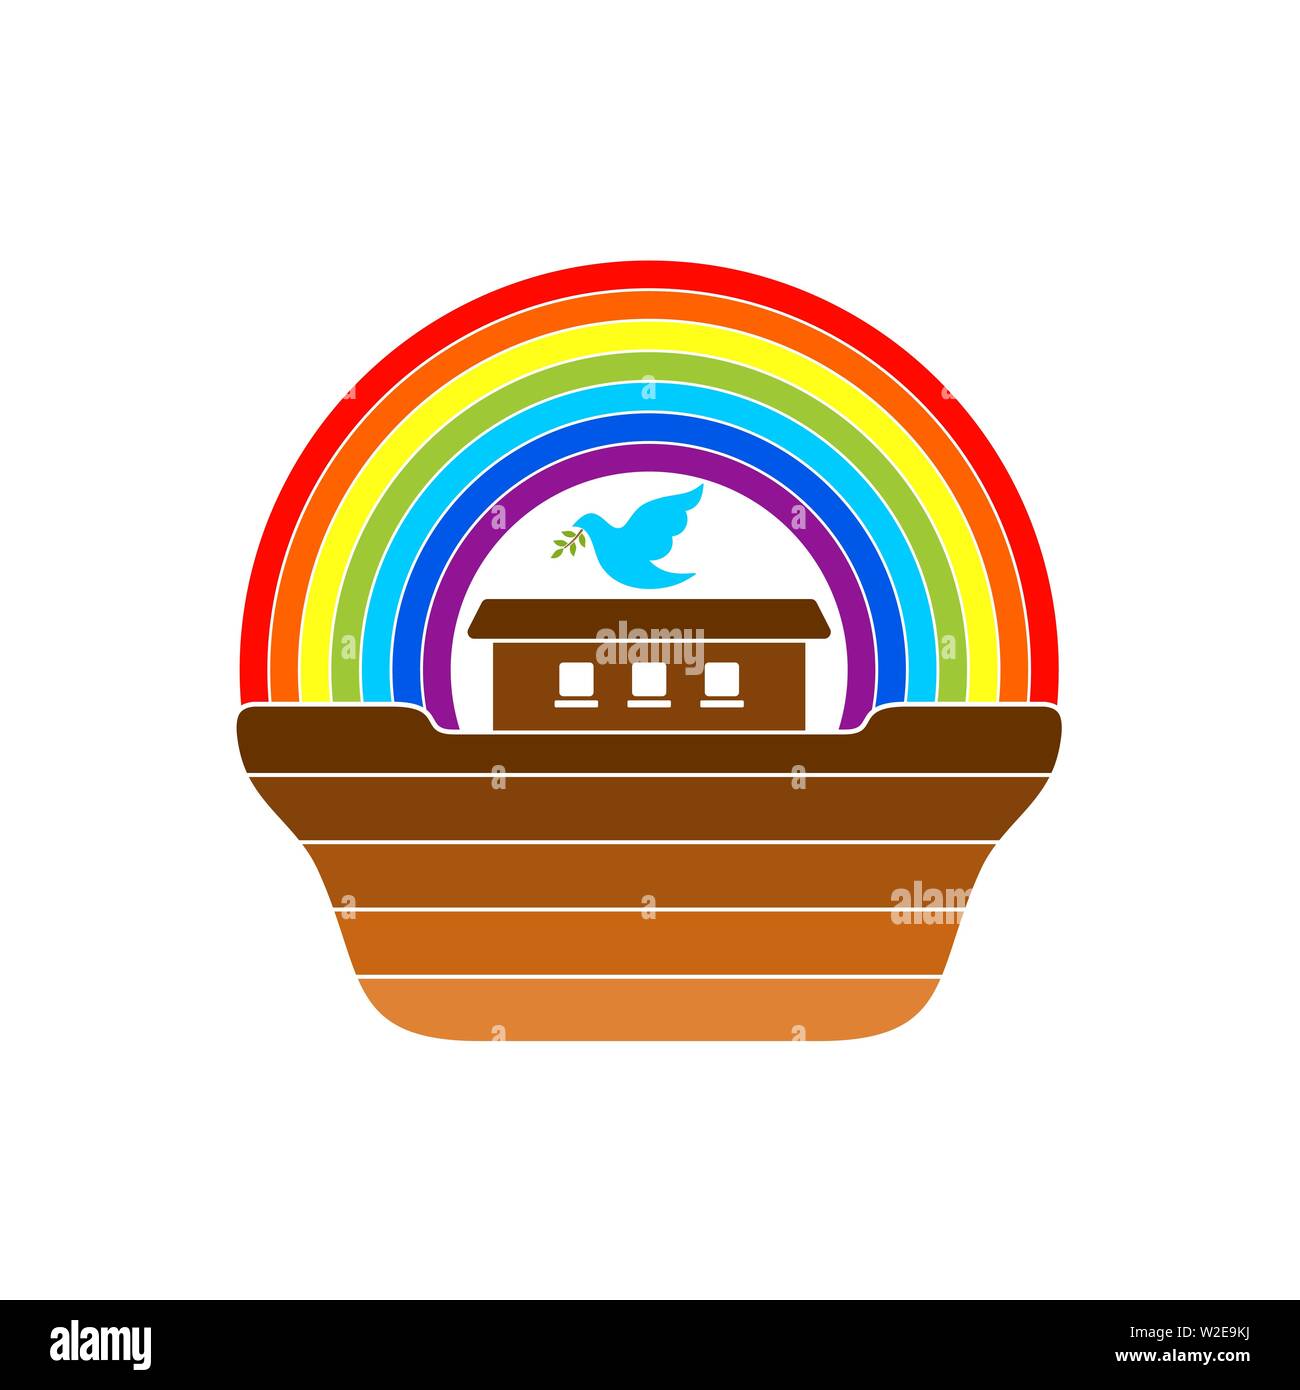 Logo of Noah's Ark. Rainbow - a symbol of the covenant. Dove with a branch of olive. Ship to rescue animals and people from the Flood. Biblical illust Stock Vector